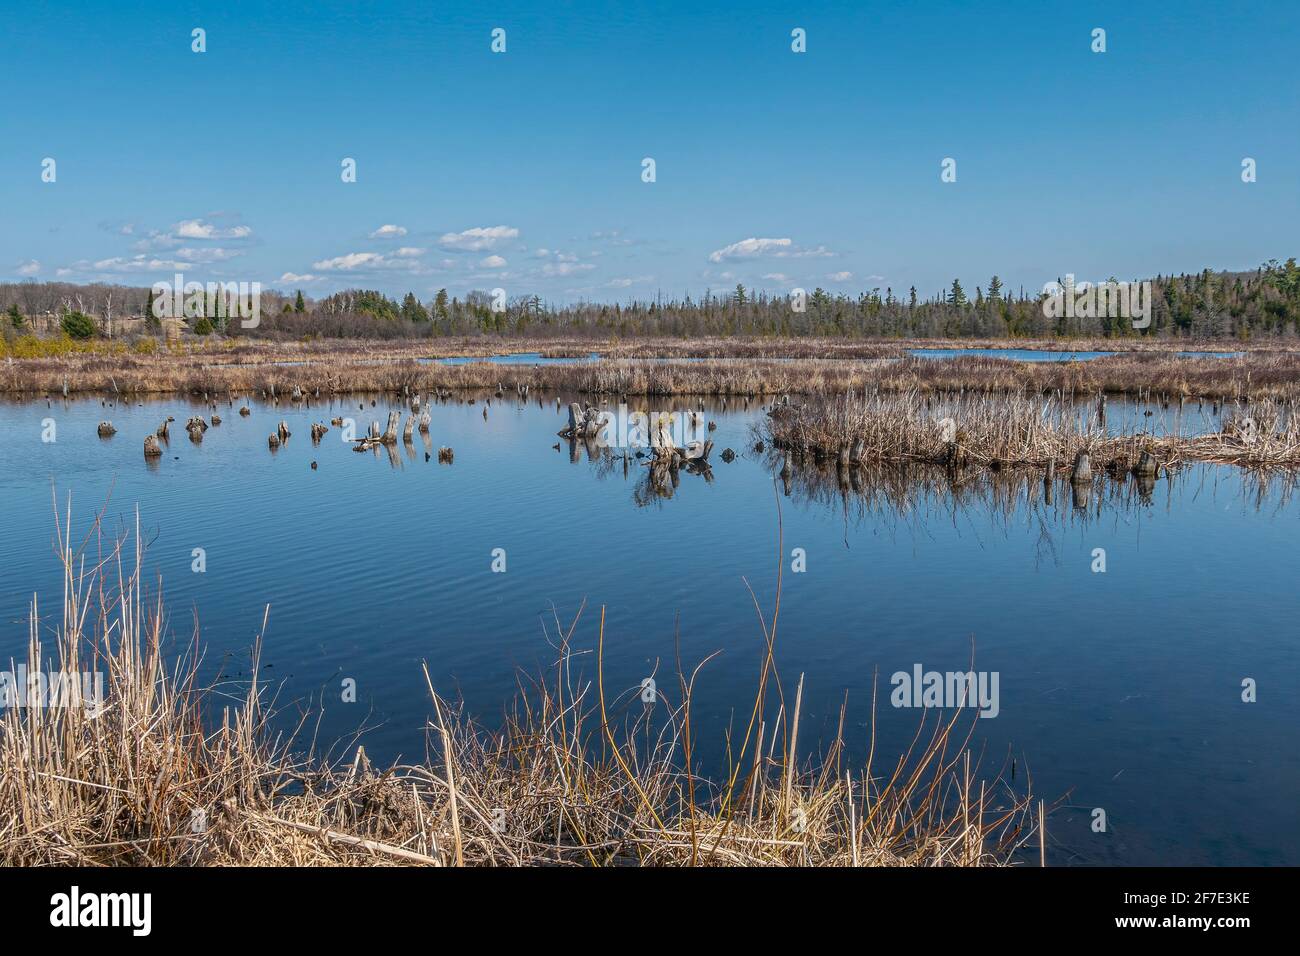 The George Langman Sactuary is a 61 acre tract of land near Orillia Ontario Canada left in a natural state as a habitat for birds and animals. Stock Photo